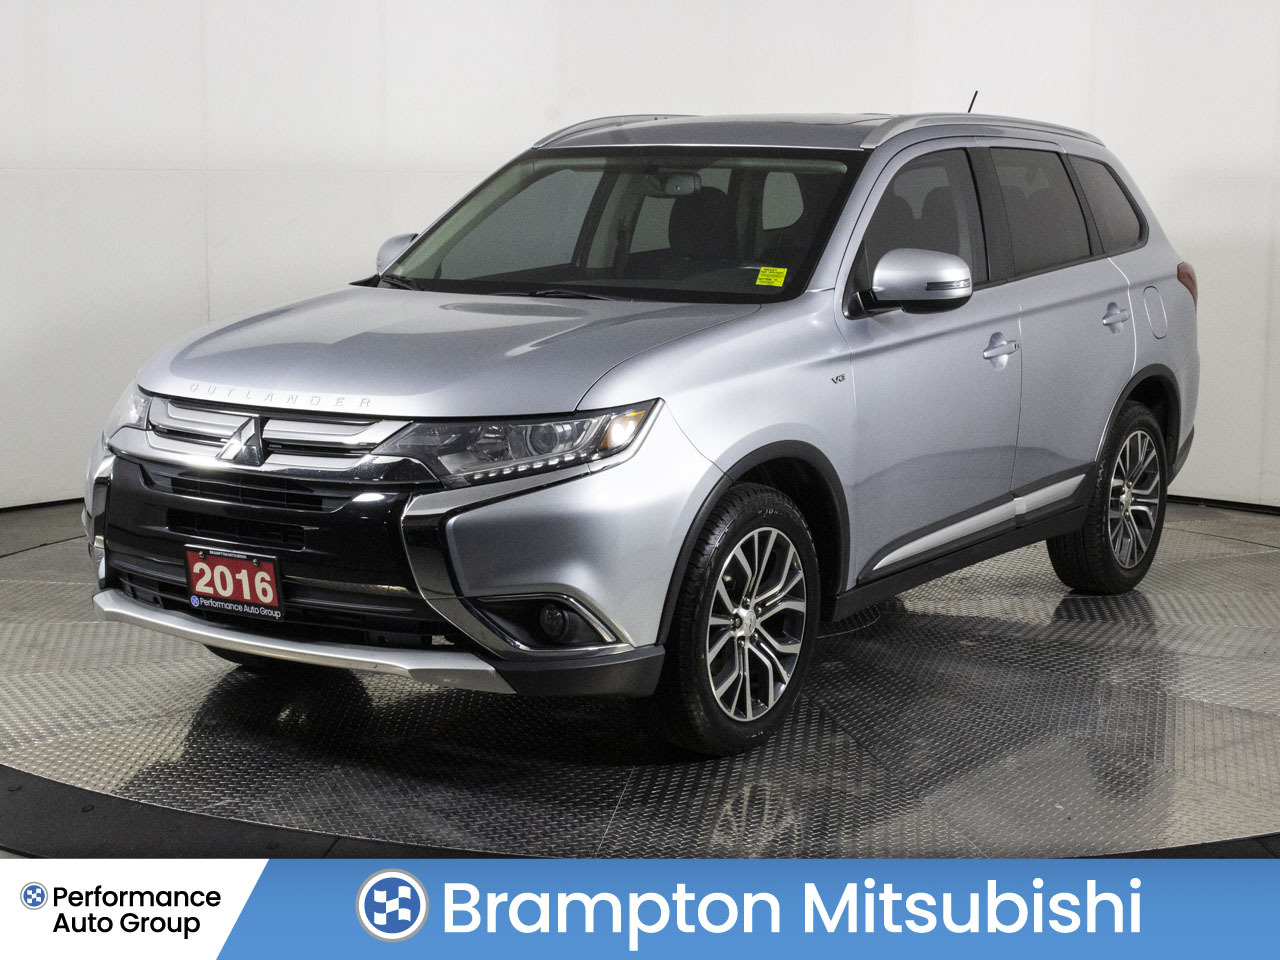 2016 Mitsubishi Outlander SE TOURING AWC| 7-SEATER| SUNROOF| REAR CAM & MORE